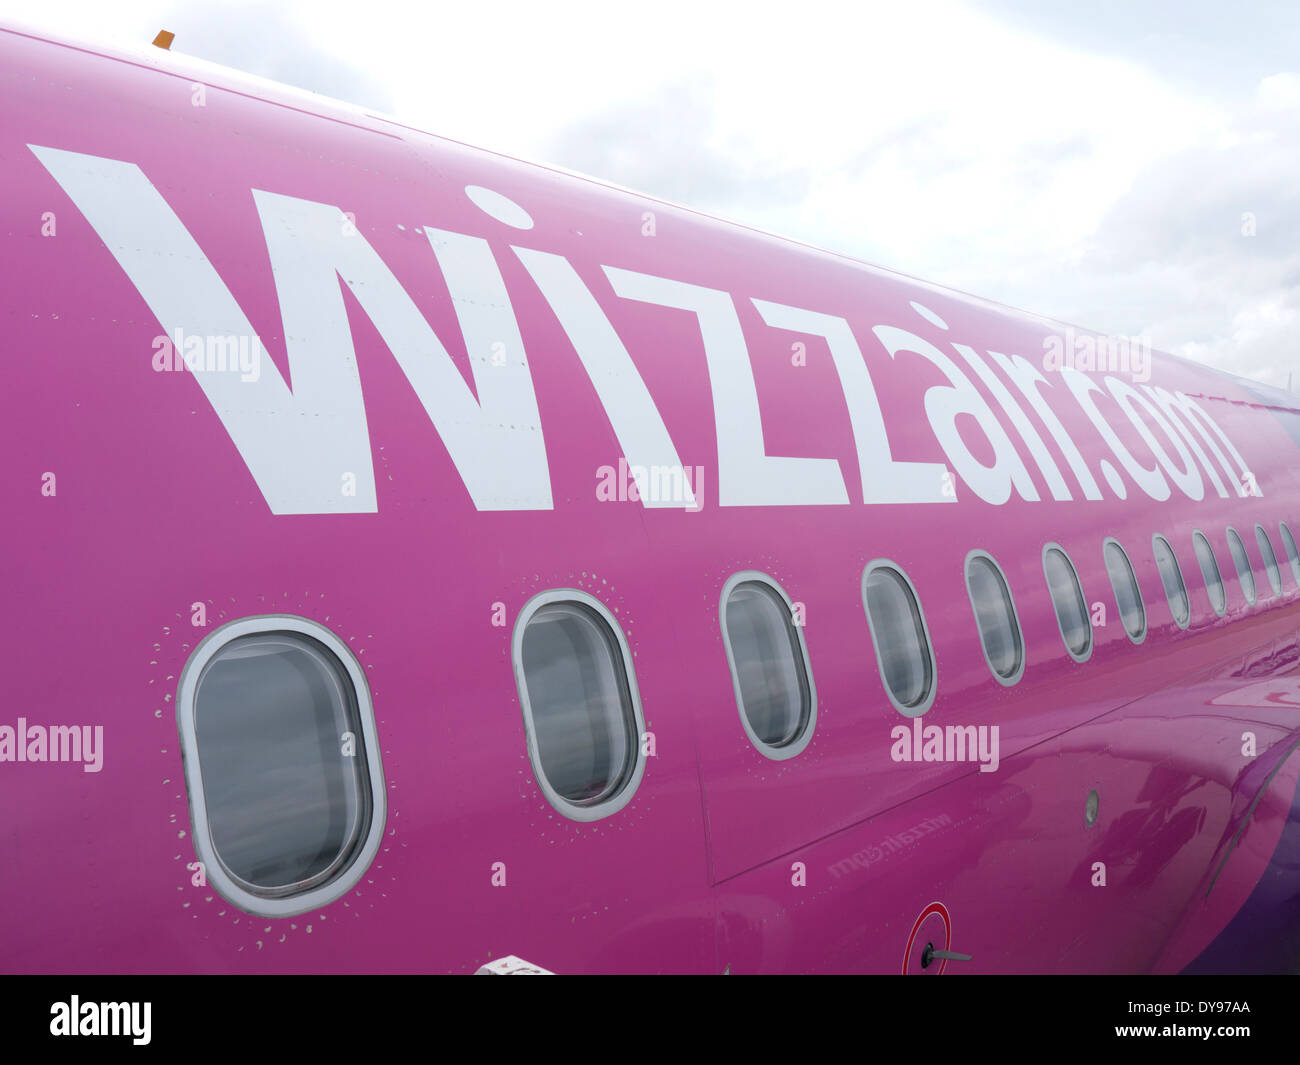 Wizzair jet, Hungarian airline company Stock Photo